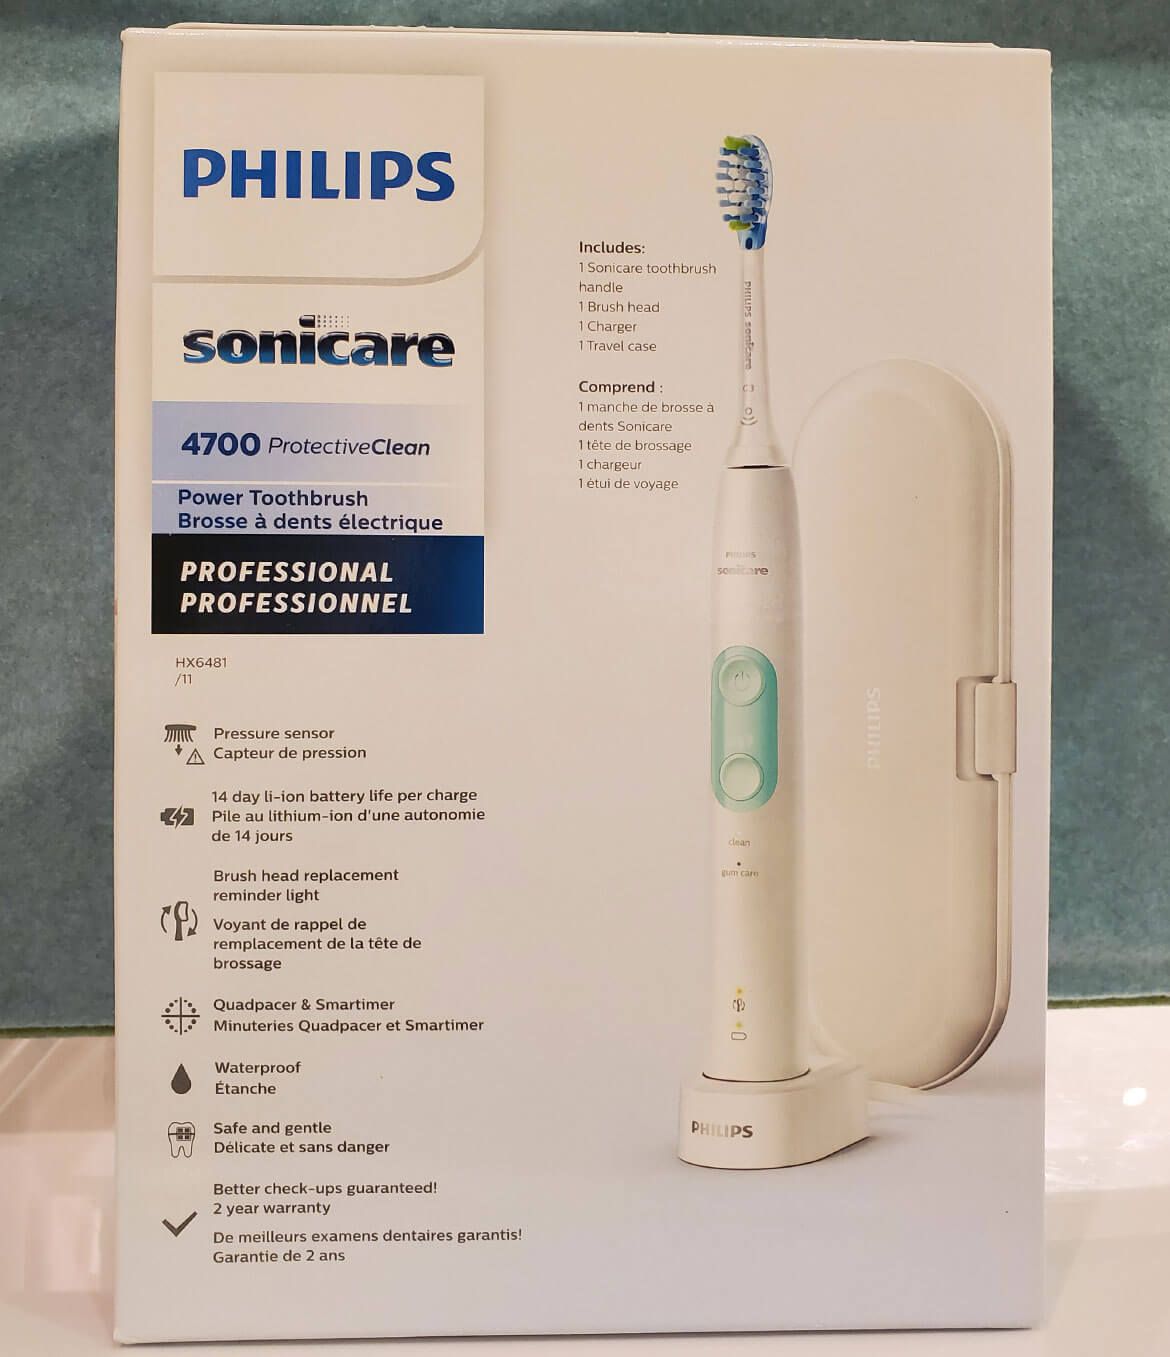 4700 Sonicare Protective Clean Power Toothbrush Light Blue